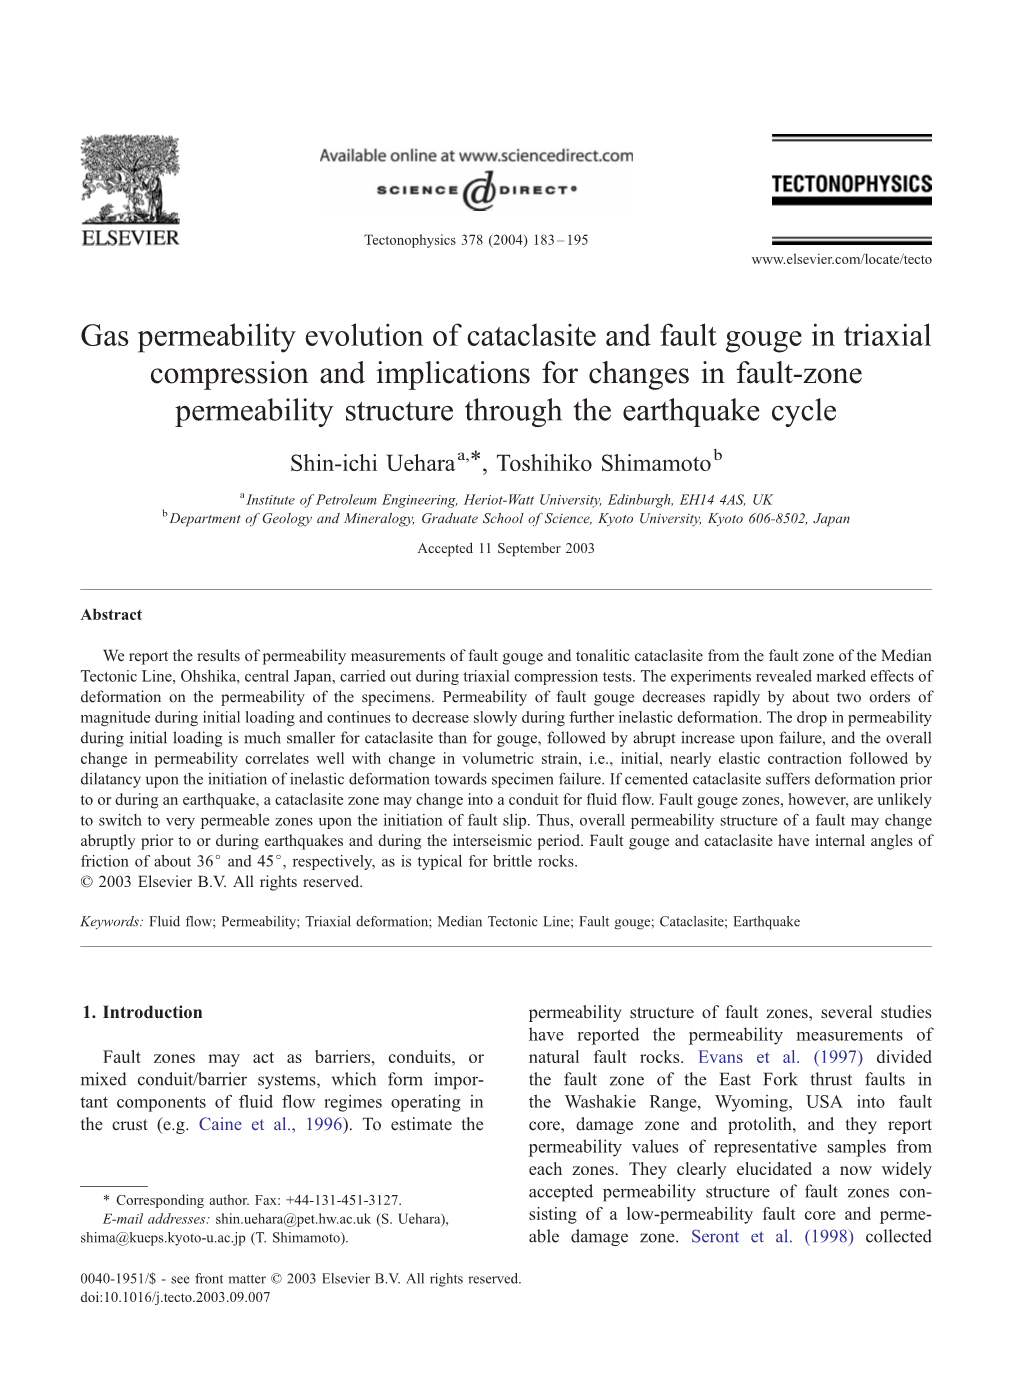 Gas Permeability Evolution of Cataclasite and Fault Gouge In